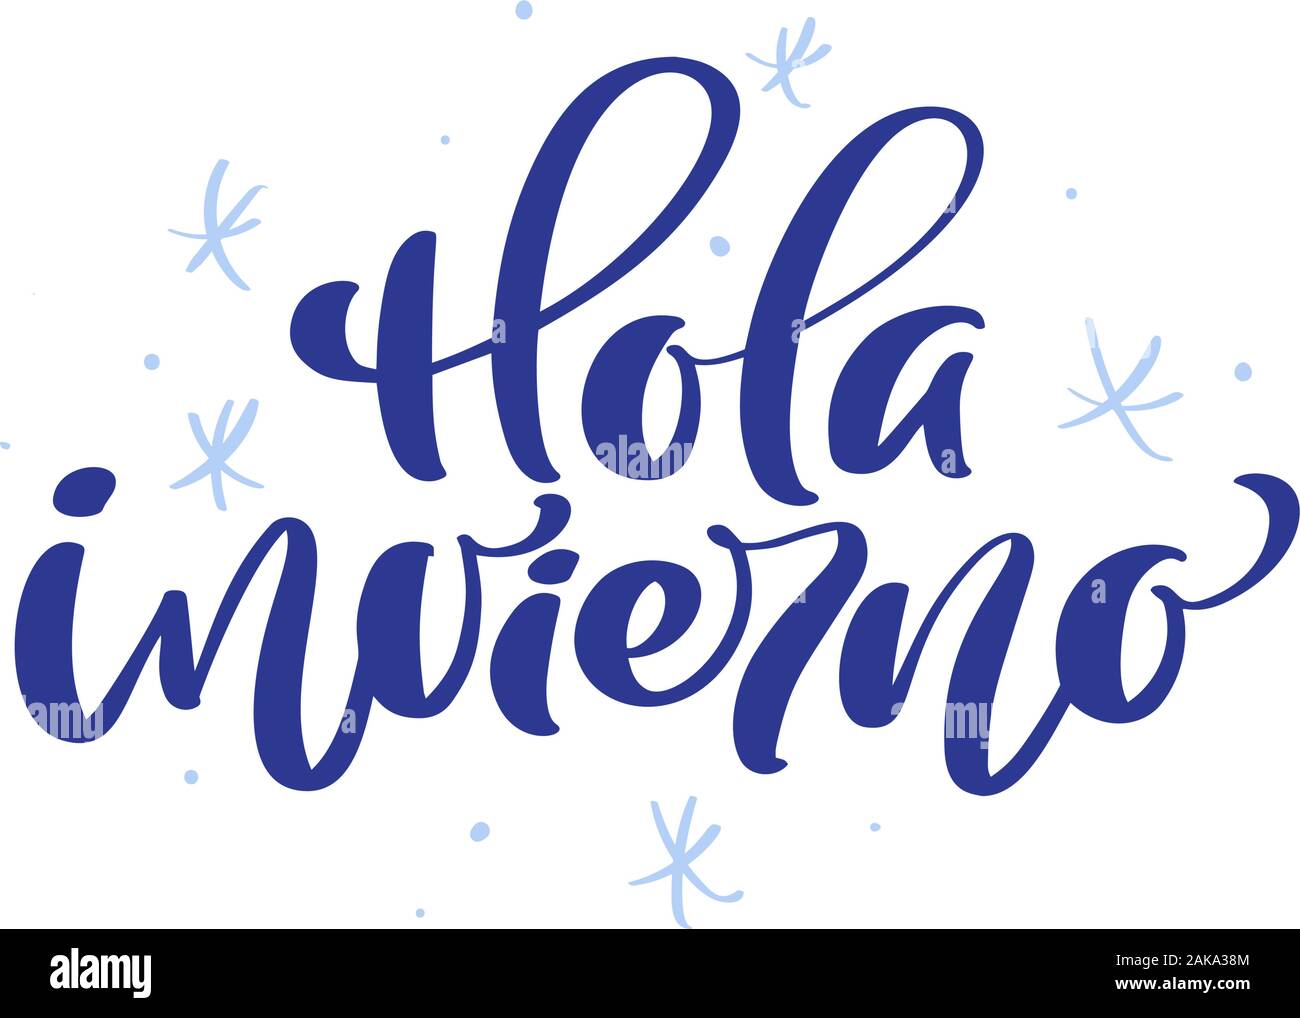 Hola, invierno hello, winter in spanish, hand drawn lettering latin quote isolated on the white background. Fun brush ink inscription for greeting Stock Vector